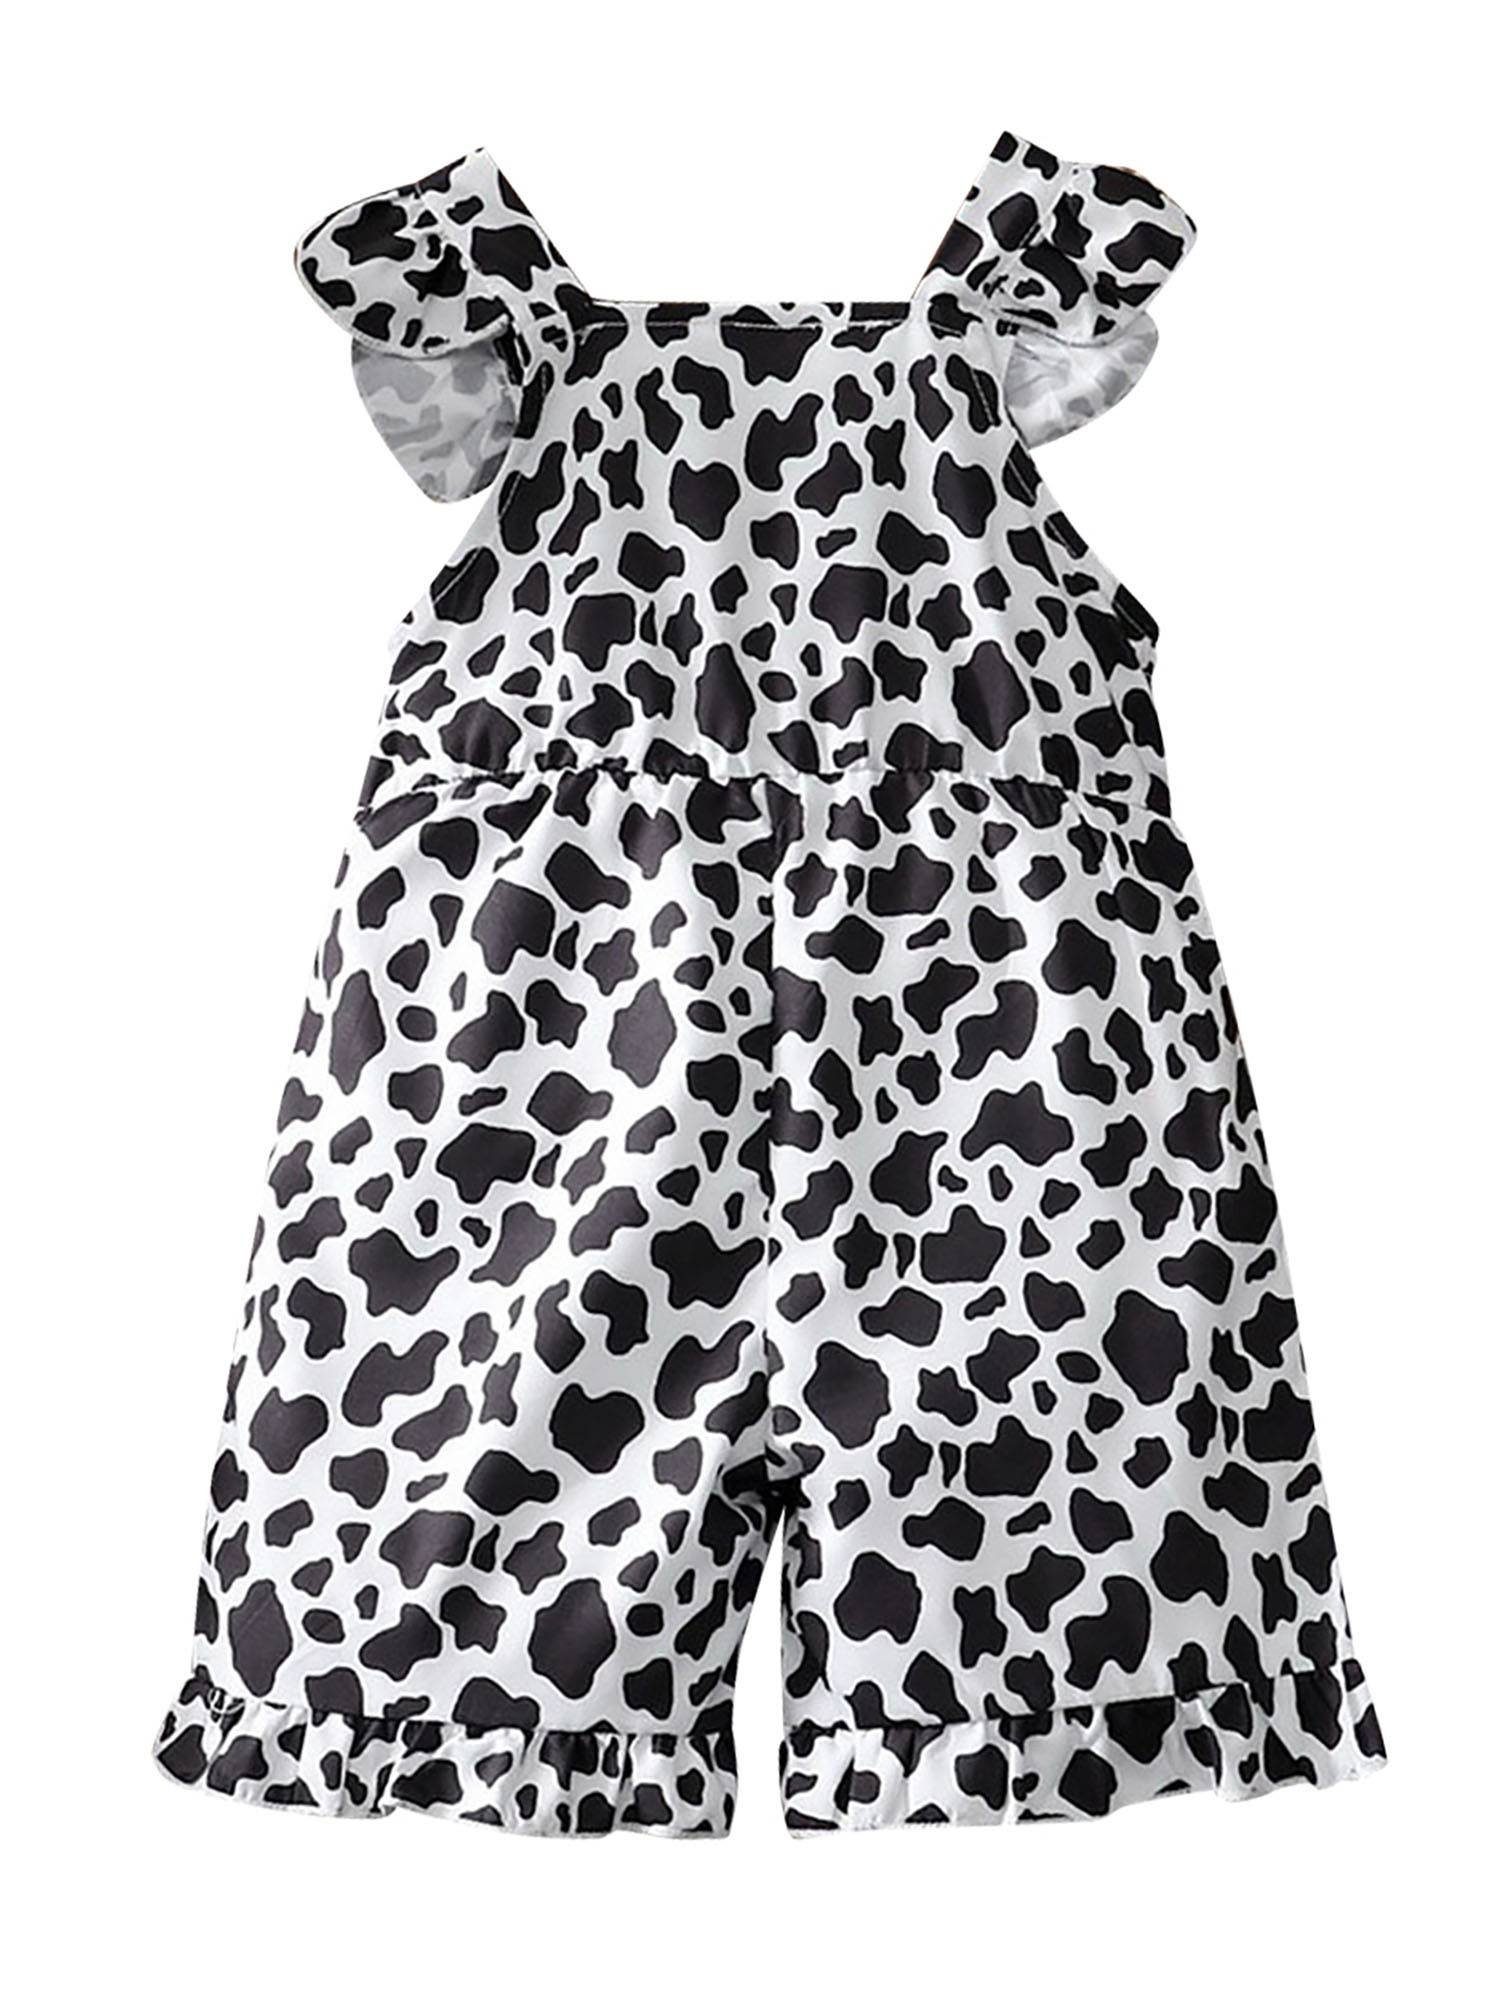 Kinder Mädchen (Gr. 50 - 92) Lapastyle Jumpsuit Baby Leopardenmuster Overall, Polyester